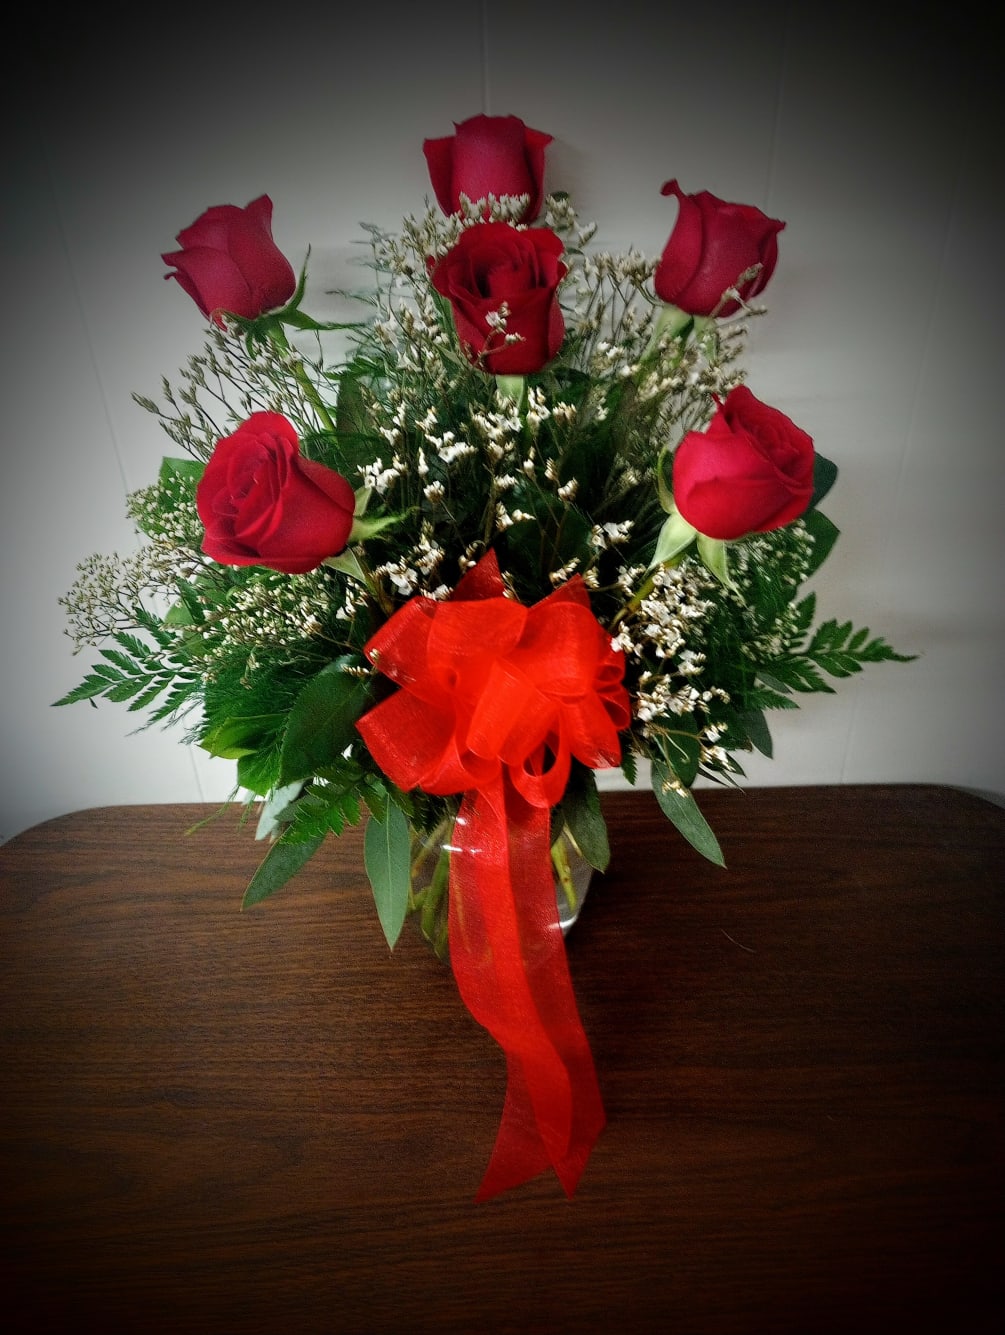 Six red roses arranged in a vase and beautifully trimmed with filler